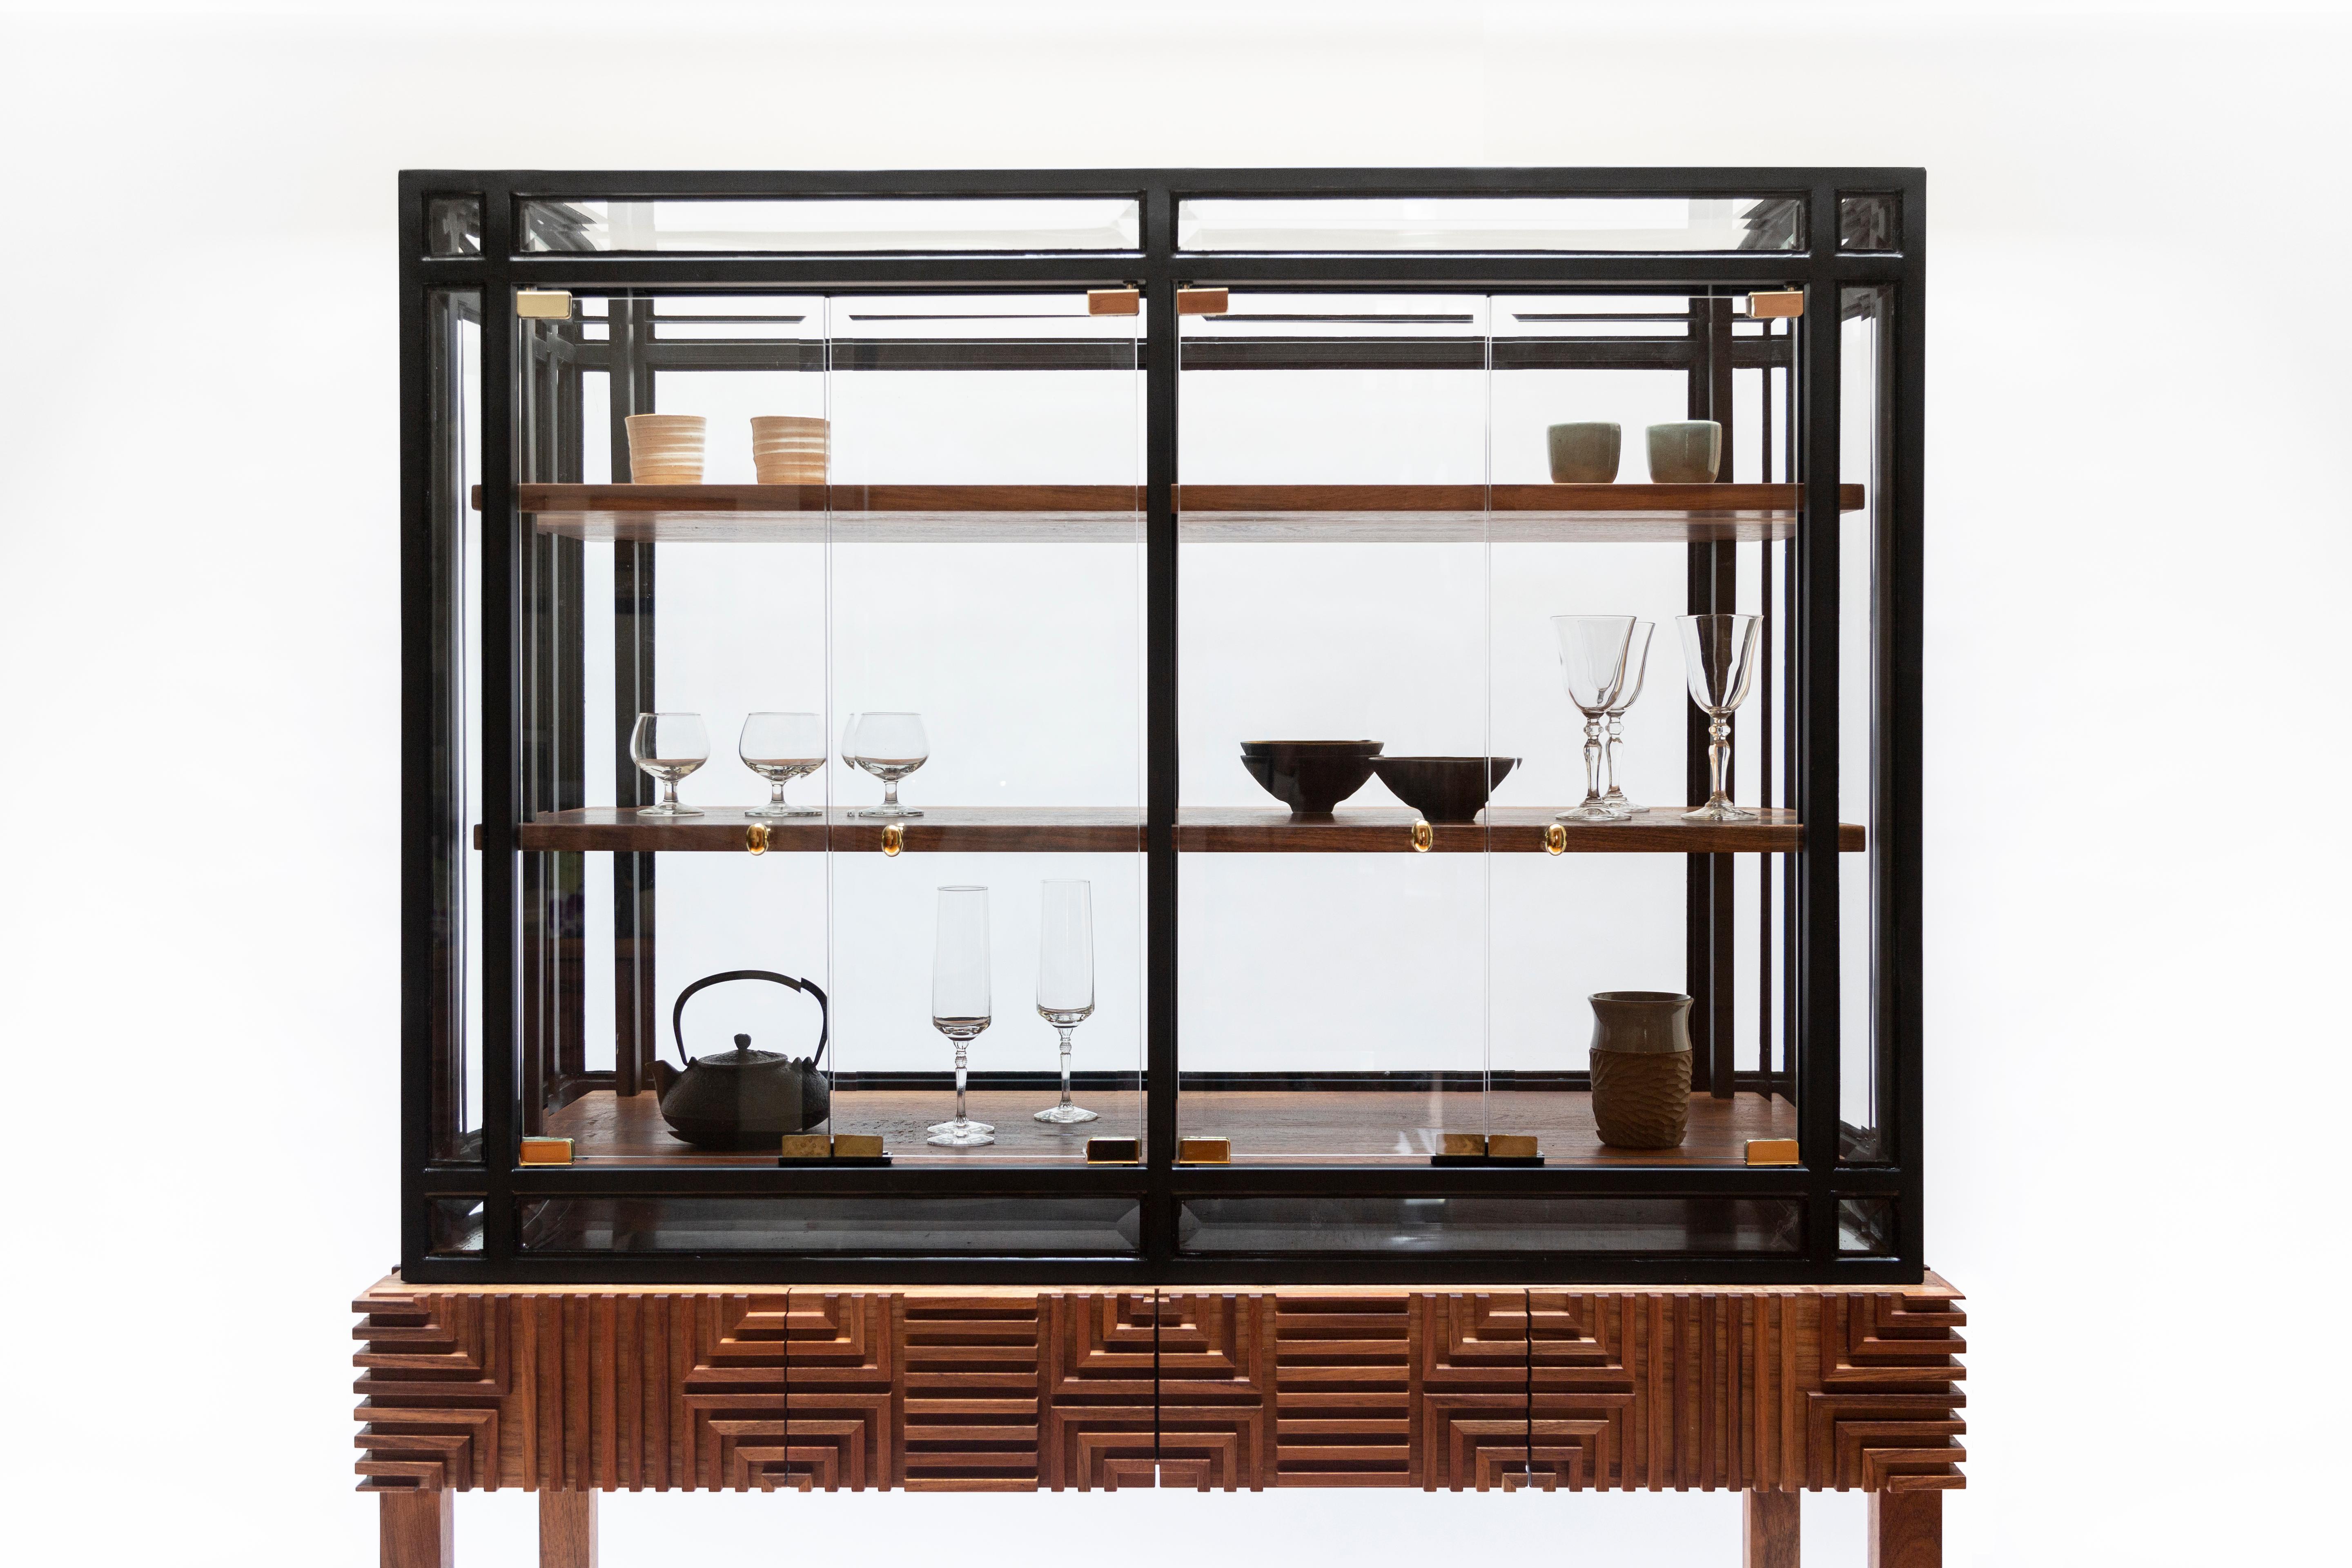 The Tarlow cabinet was originally designed for Mexico DesignWeek in which the creators referenced antique glass cabinets and won an Honorable Mention. The Tarlow cabinet is composed of two bodies and materials that are juxtaposed creating a new